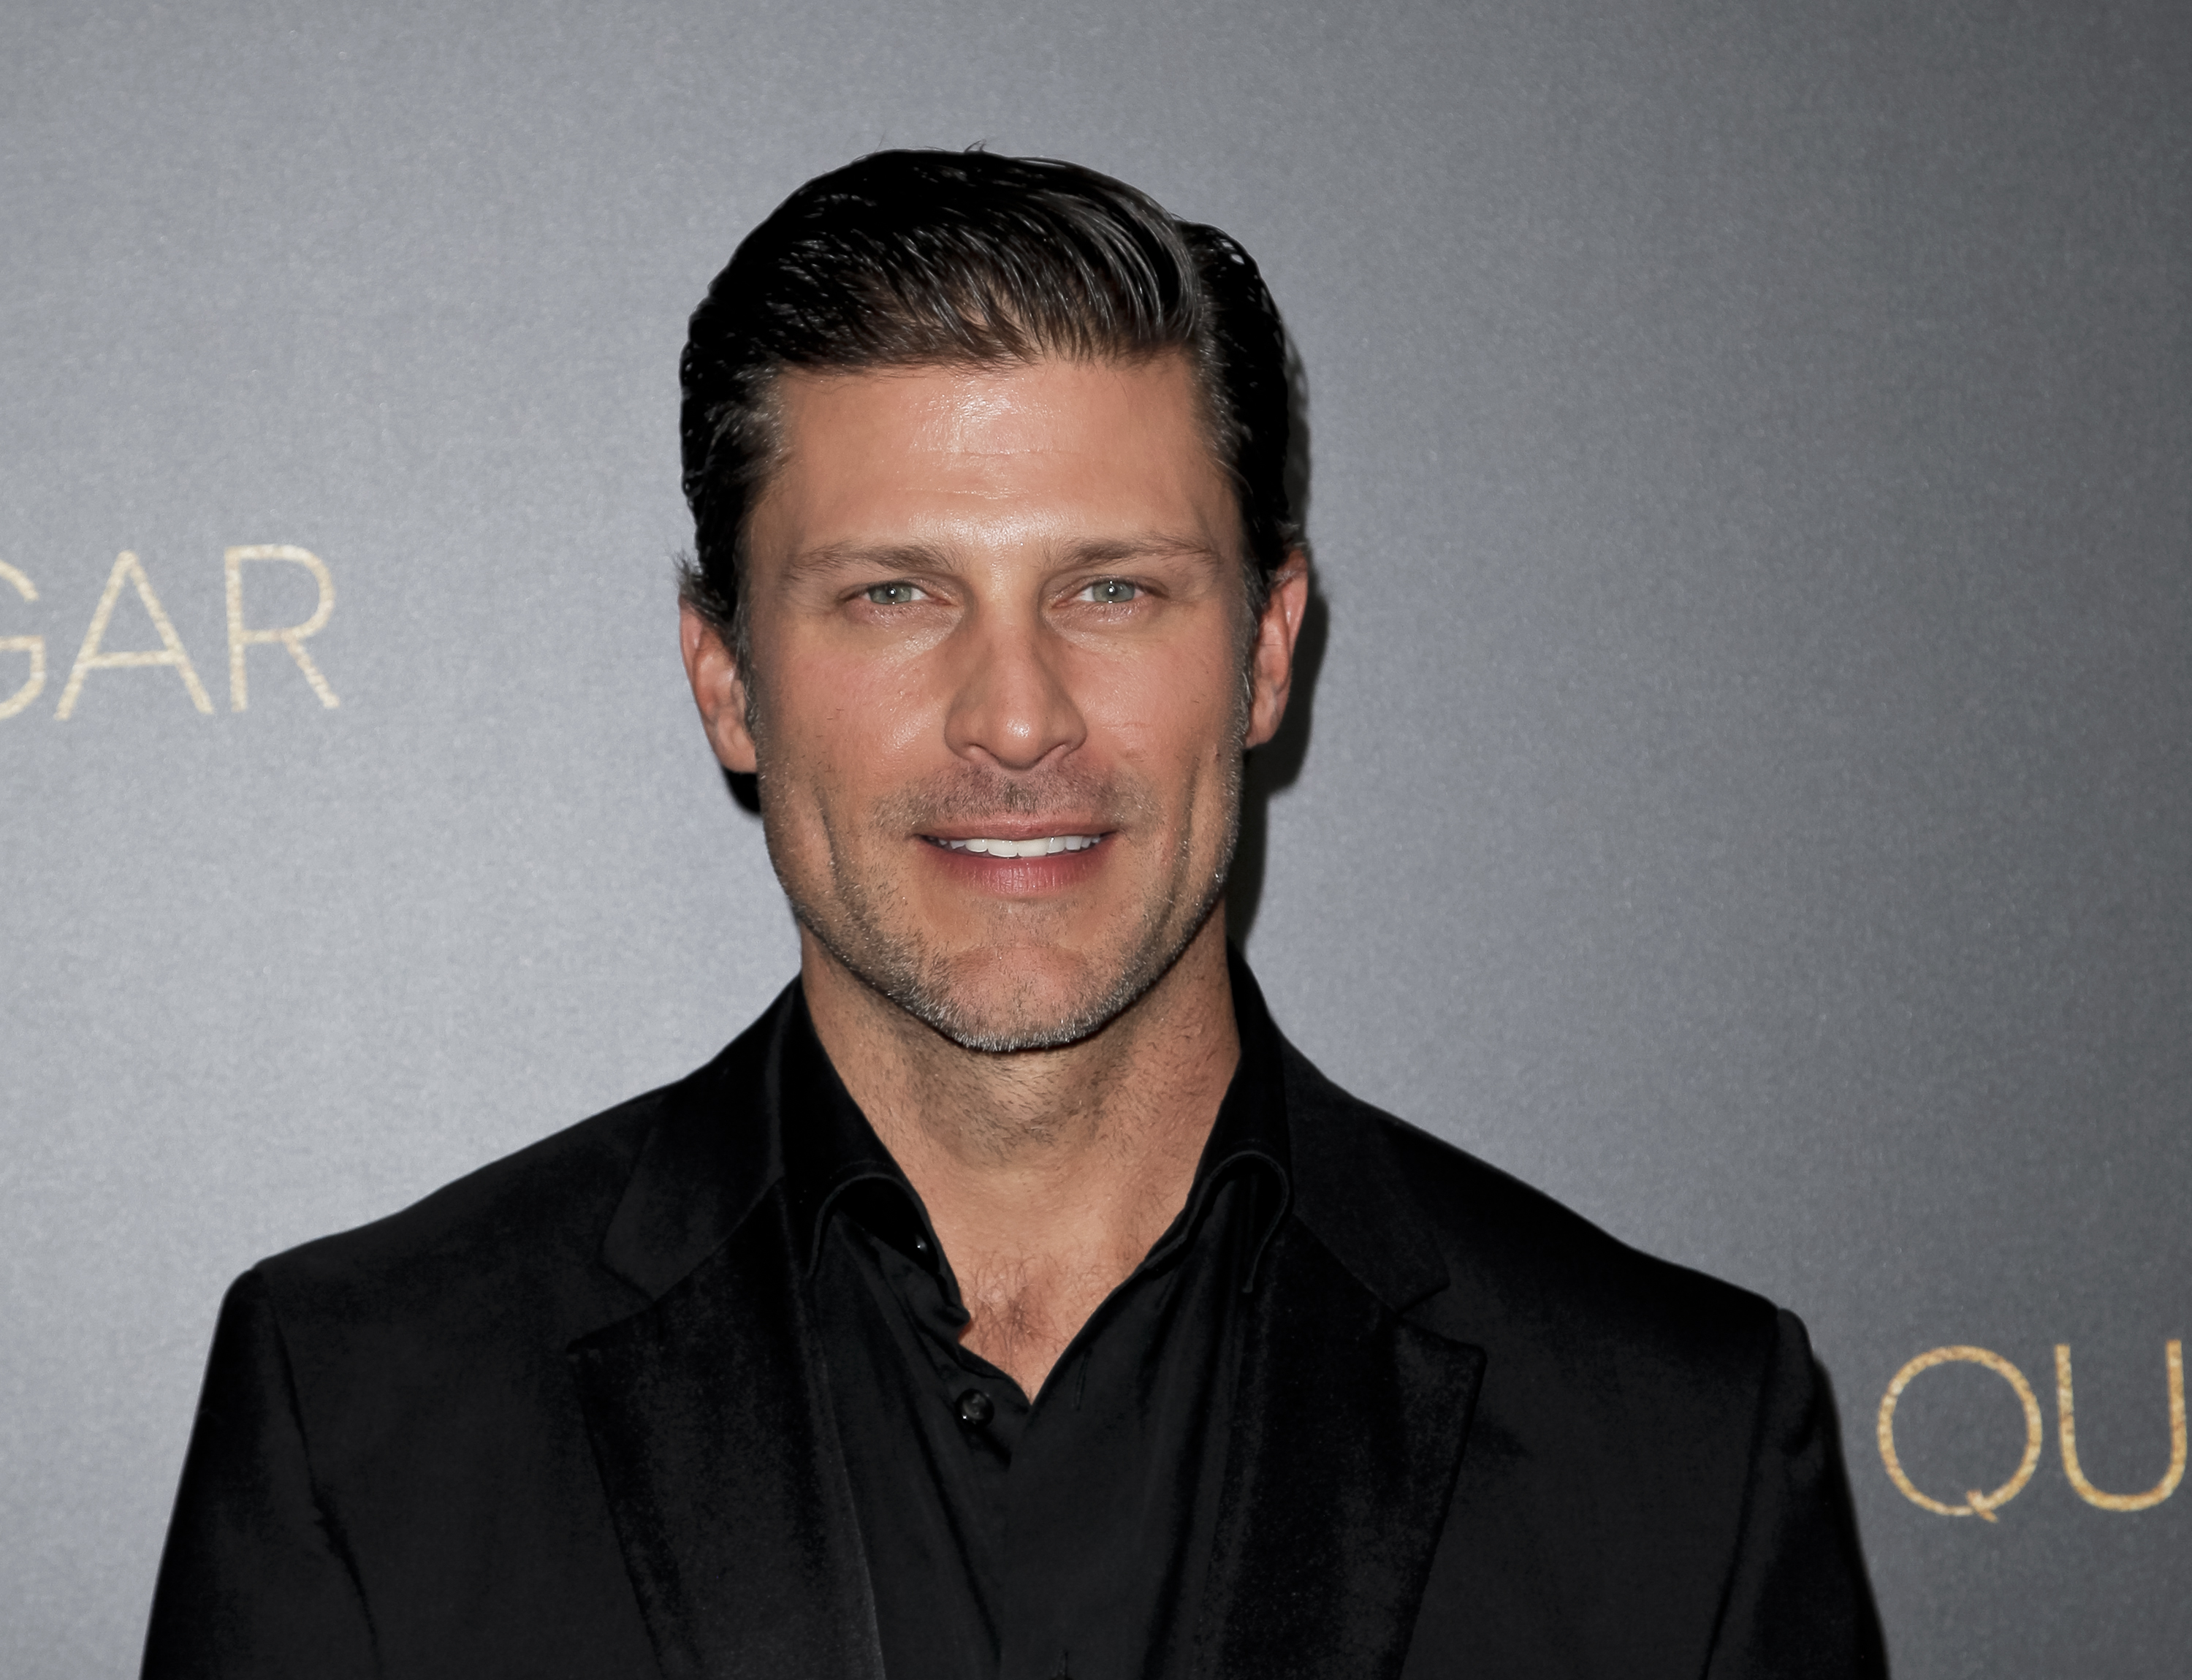 'Days of Our Lives' actor Greg Vaughan wearing a black suit during a red carpet appearance.